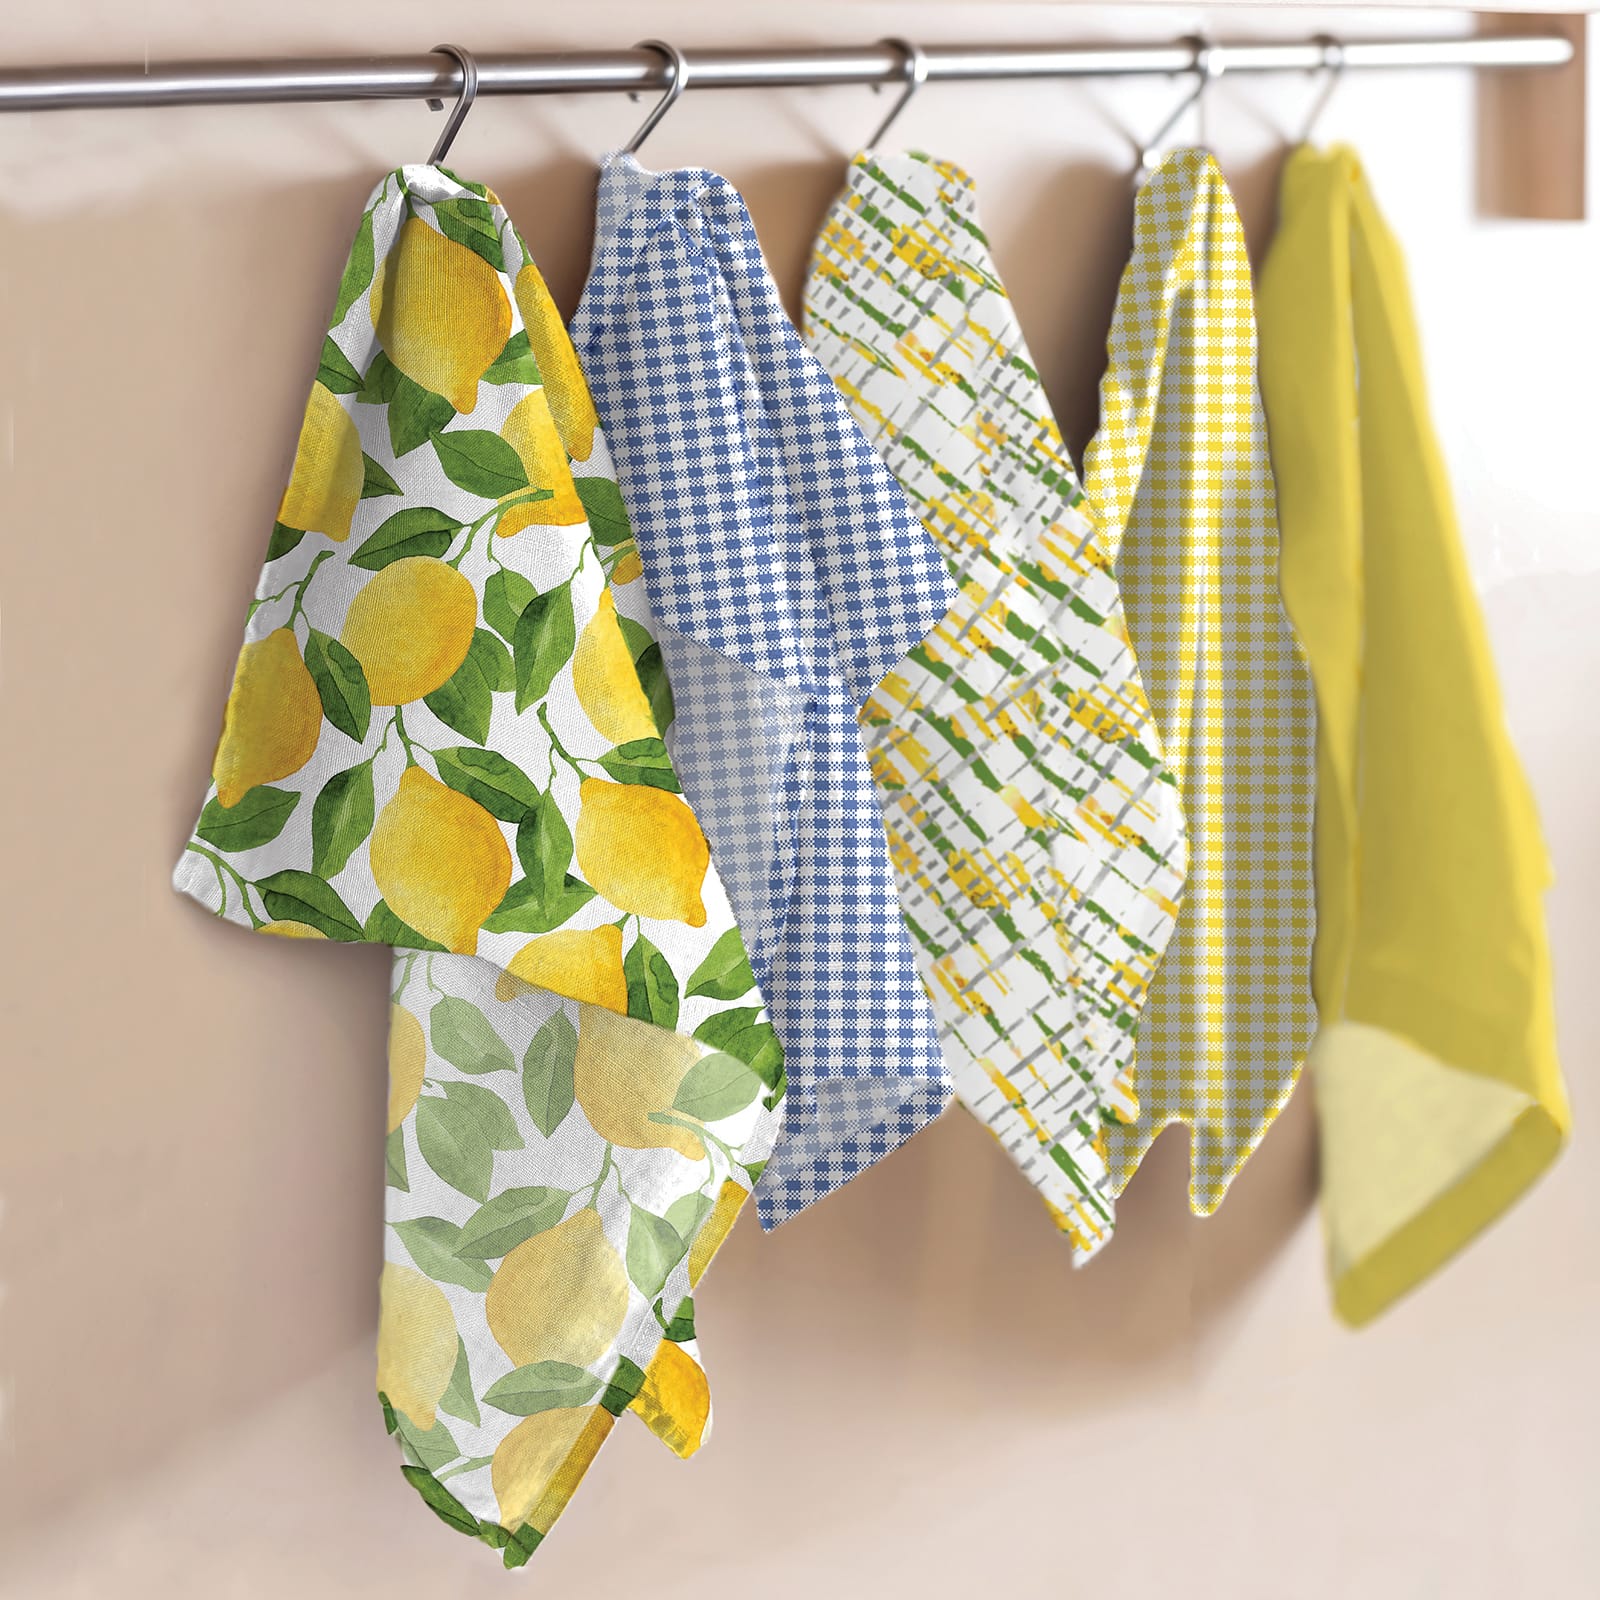 Yellow &#x26; White Plaid Cotton Fabric by Loops &#x26; Threads&#x2122;